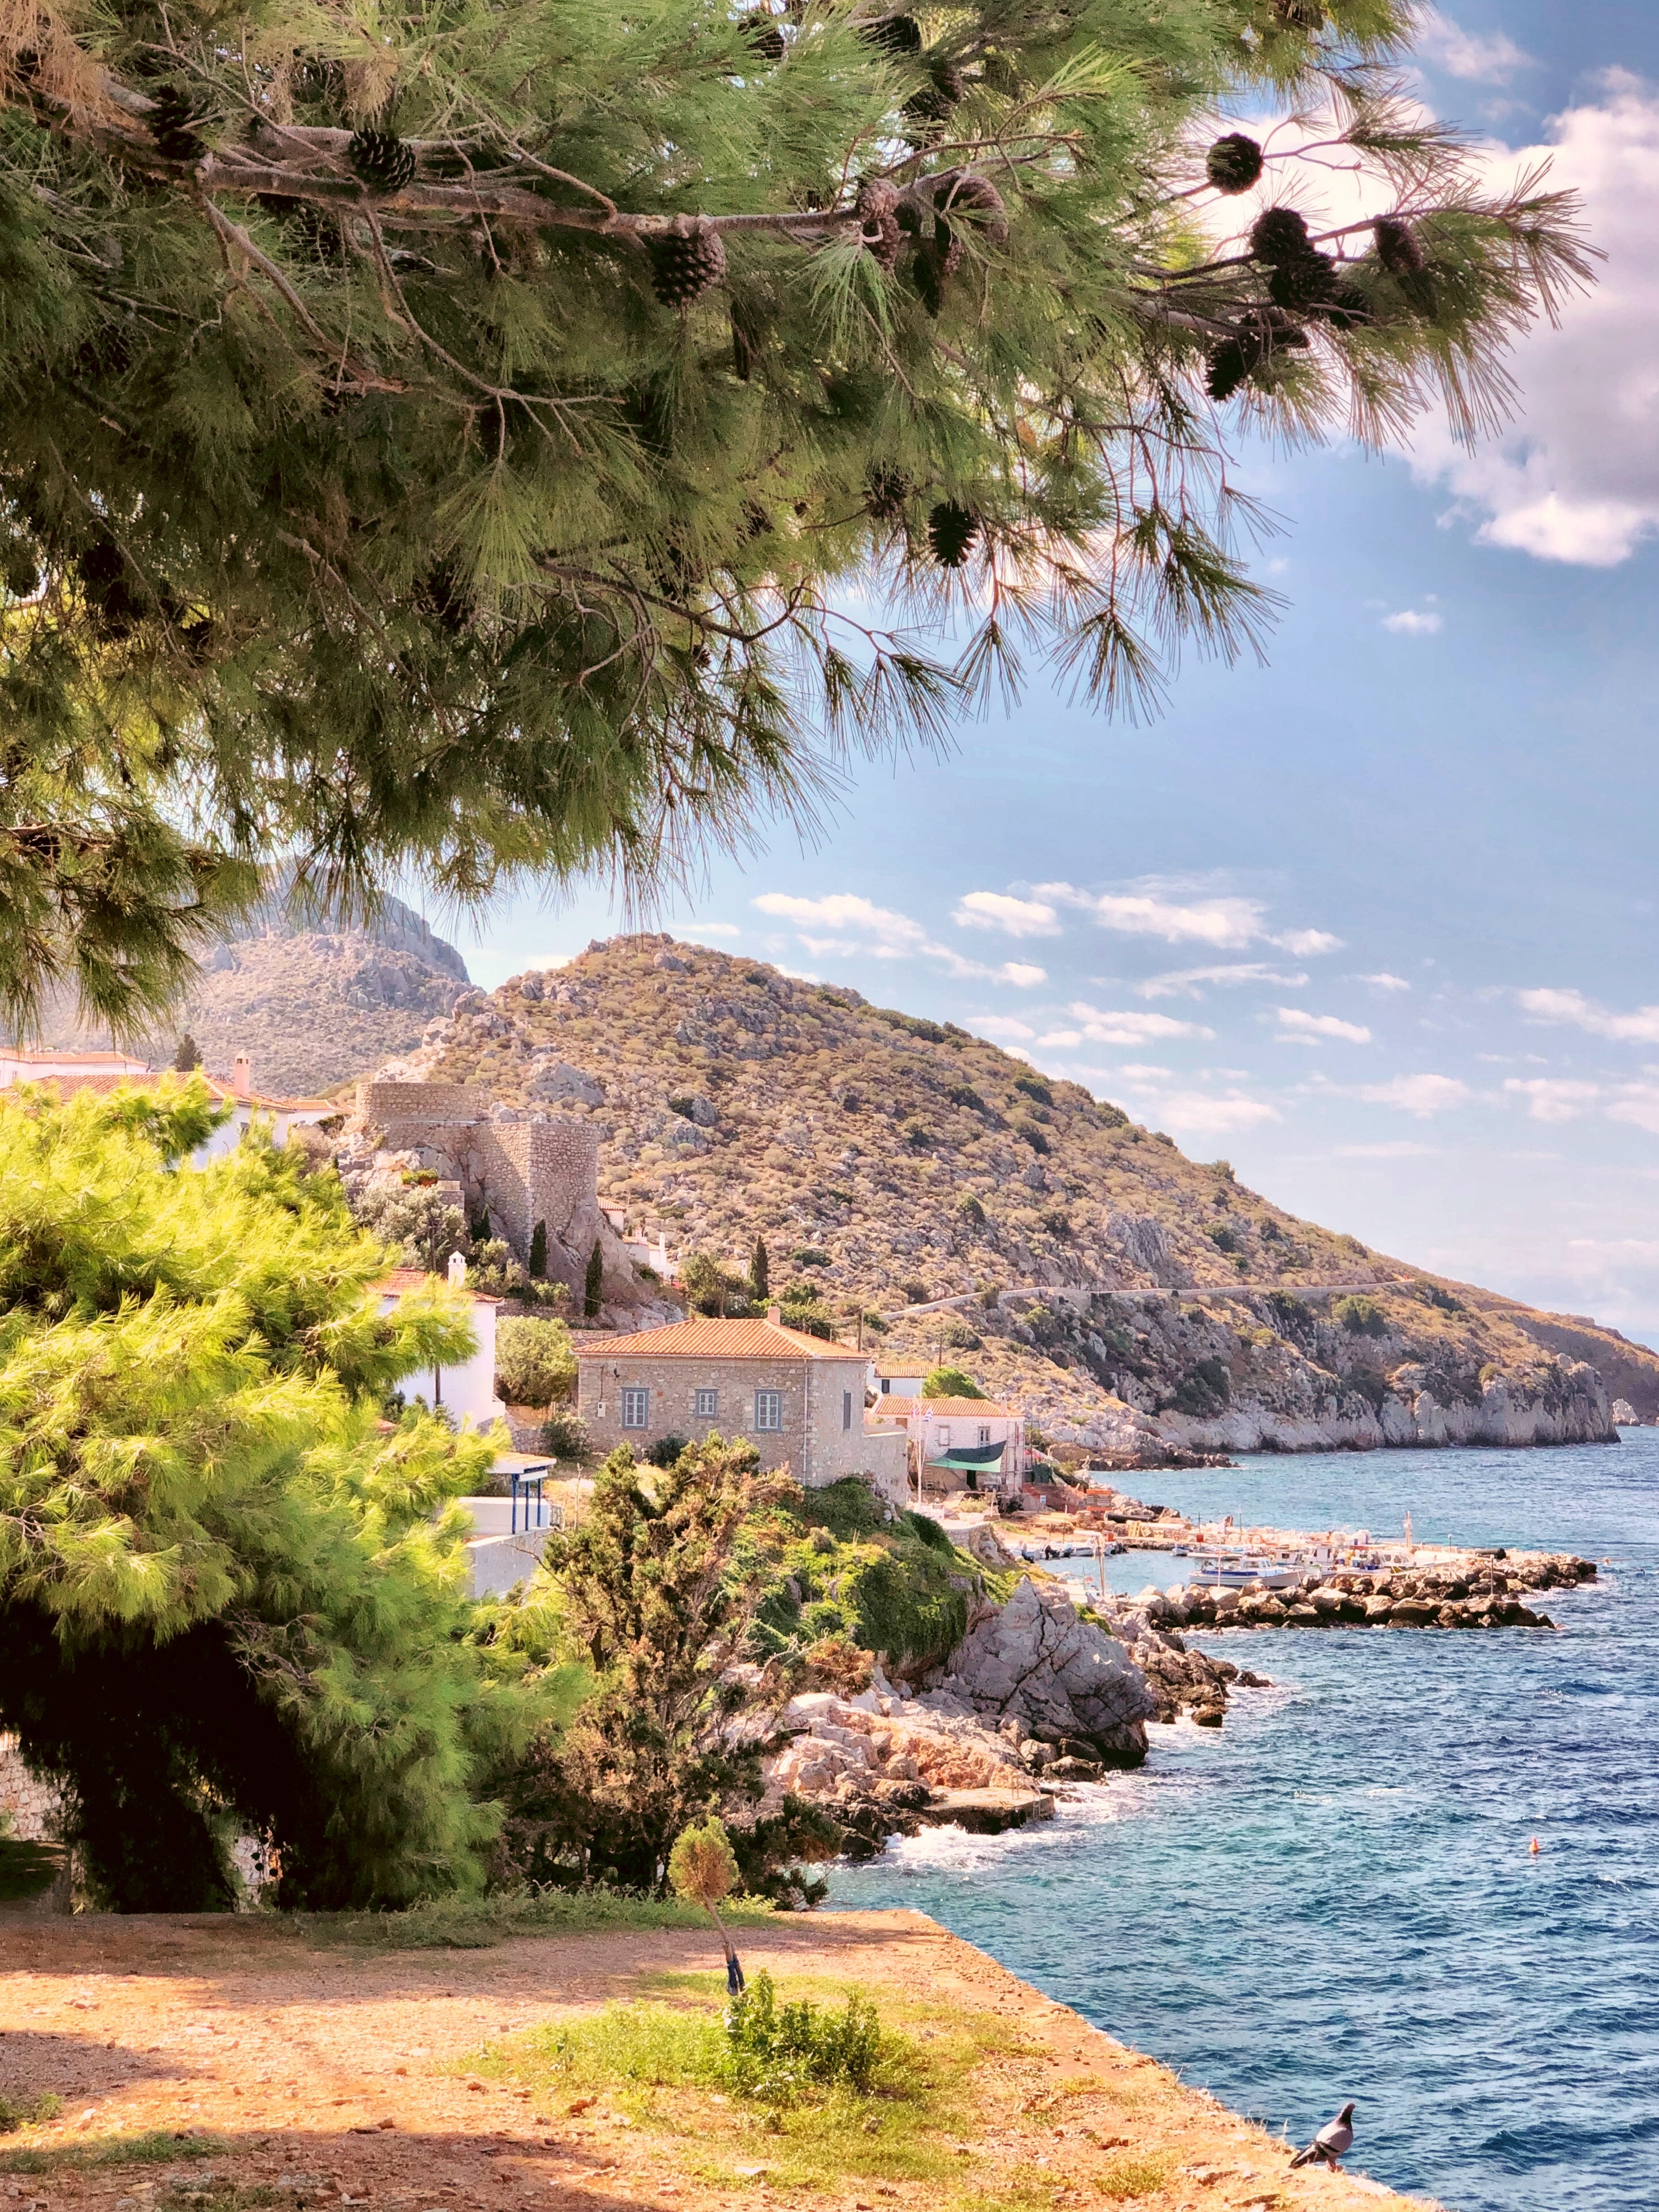 One of Greece’s Saronic islands, <a href="https://www.cntraveler.com/story/hydra-greece-stephan-colloredo-mansfeld-locals-guide?mbid=synd_msn_rss&utm_source=msn&utm_medium=syndication">Hydra</a> is the perfect spot for a digital detox or quiet solo trip—mainly due to the fact that there are absolutely no cars allowed here. Instead, you’ll find cobblestoned streets traversed by mules and donkeys, immaculate stone mansions, and picturesque, harbor-side cafes.<p>Sign up to receive the latest news, expert tips, and inspiration on all things travel</p><a href="https://www.cntraveler.com/newsletter/the-daily?sourceCode=msnsend">Inspire Me</a>